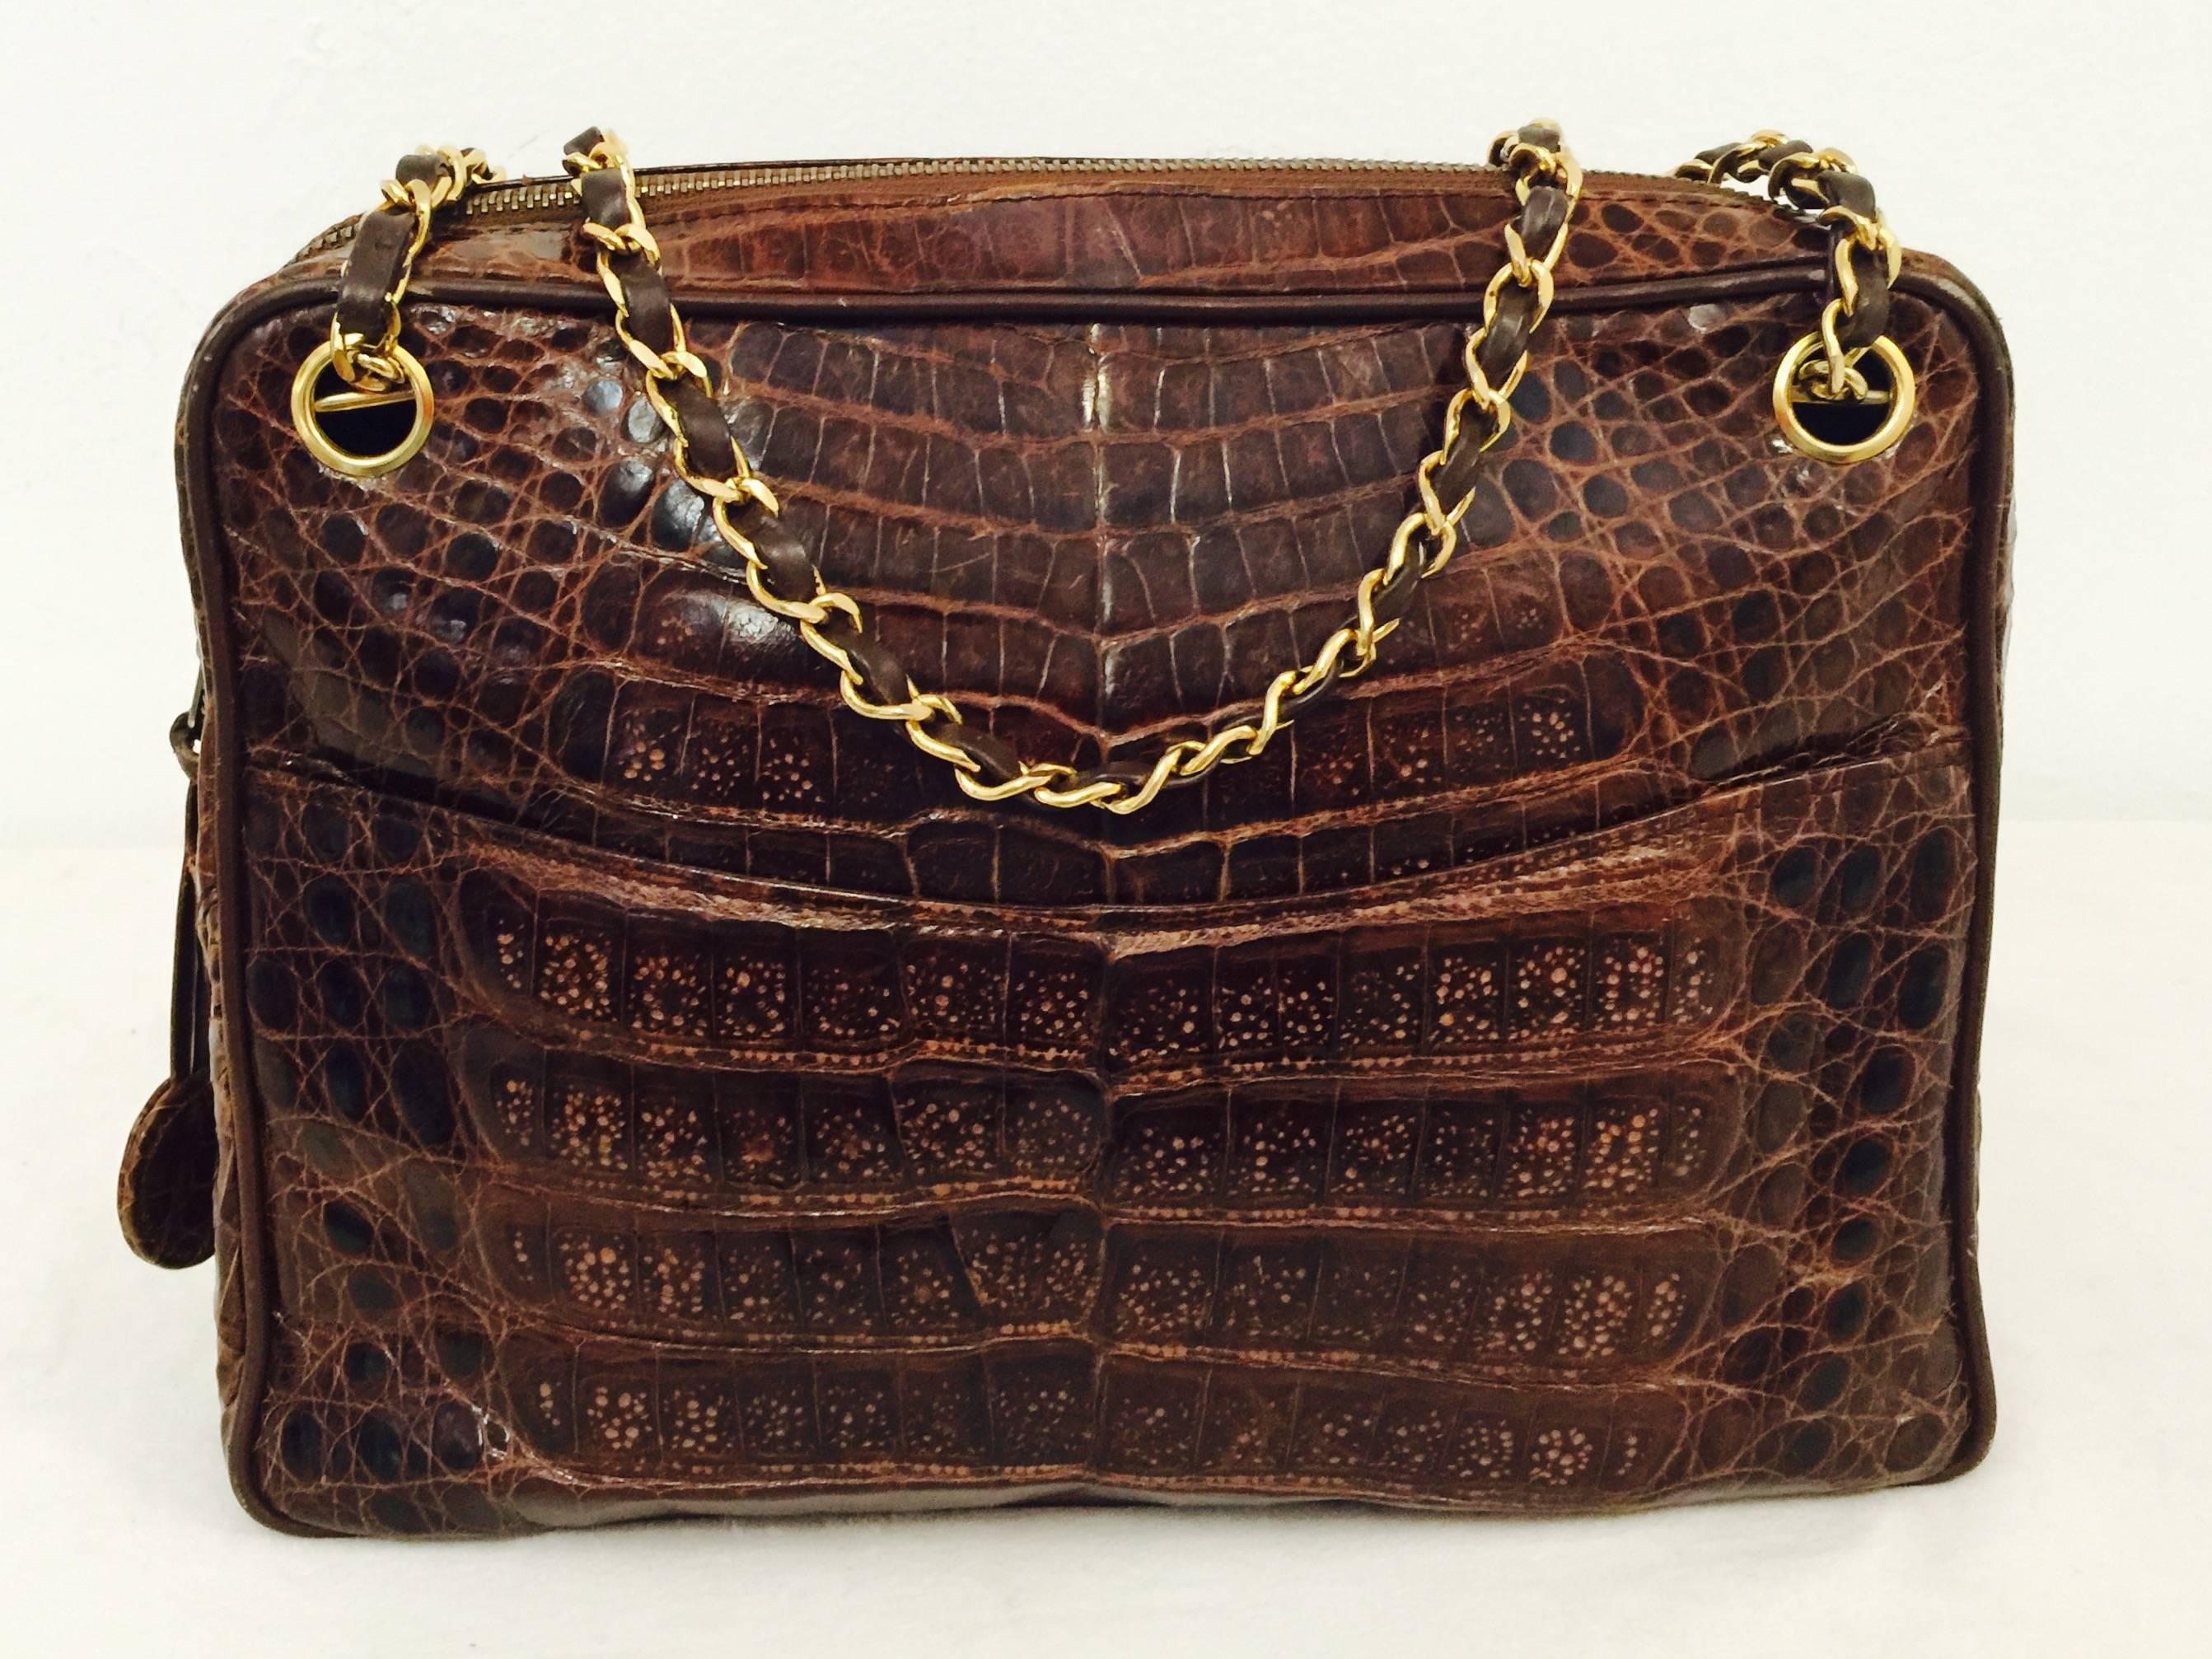 The gold chains say it all...undeniably Chanel! Live the fantasy with this quintessential and most luxurious bag in timeless crocodile. Two convenient exterior pockets and two interior zippered pockets. Additional interior accessories open pocket